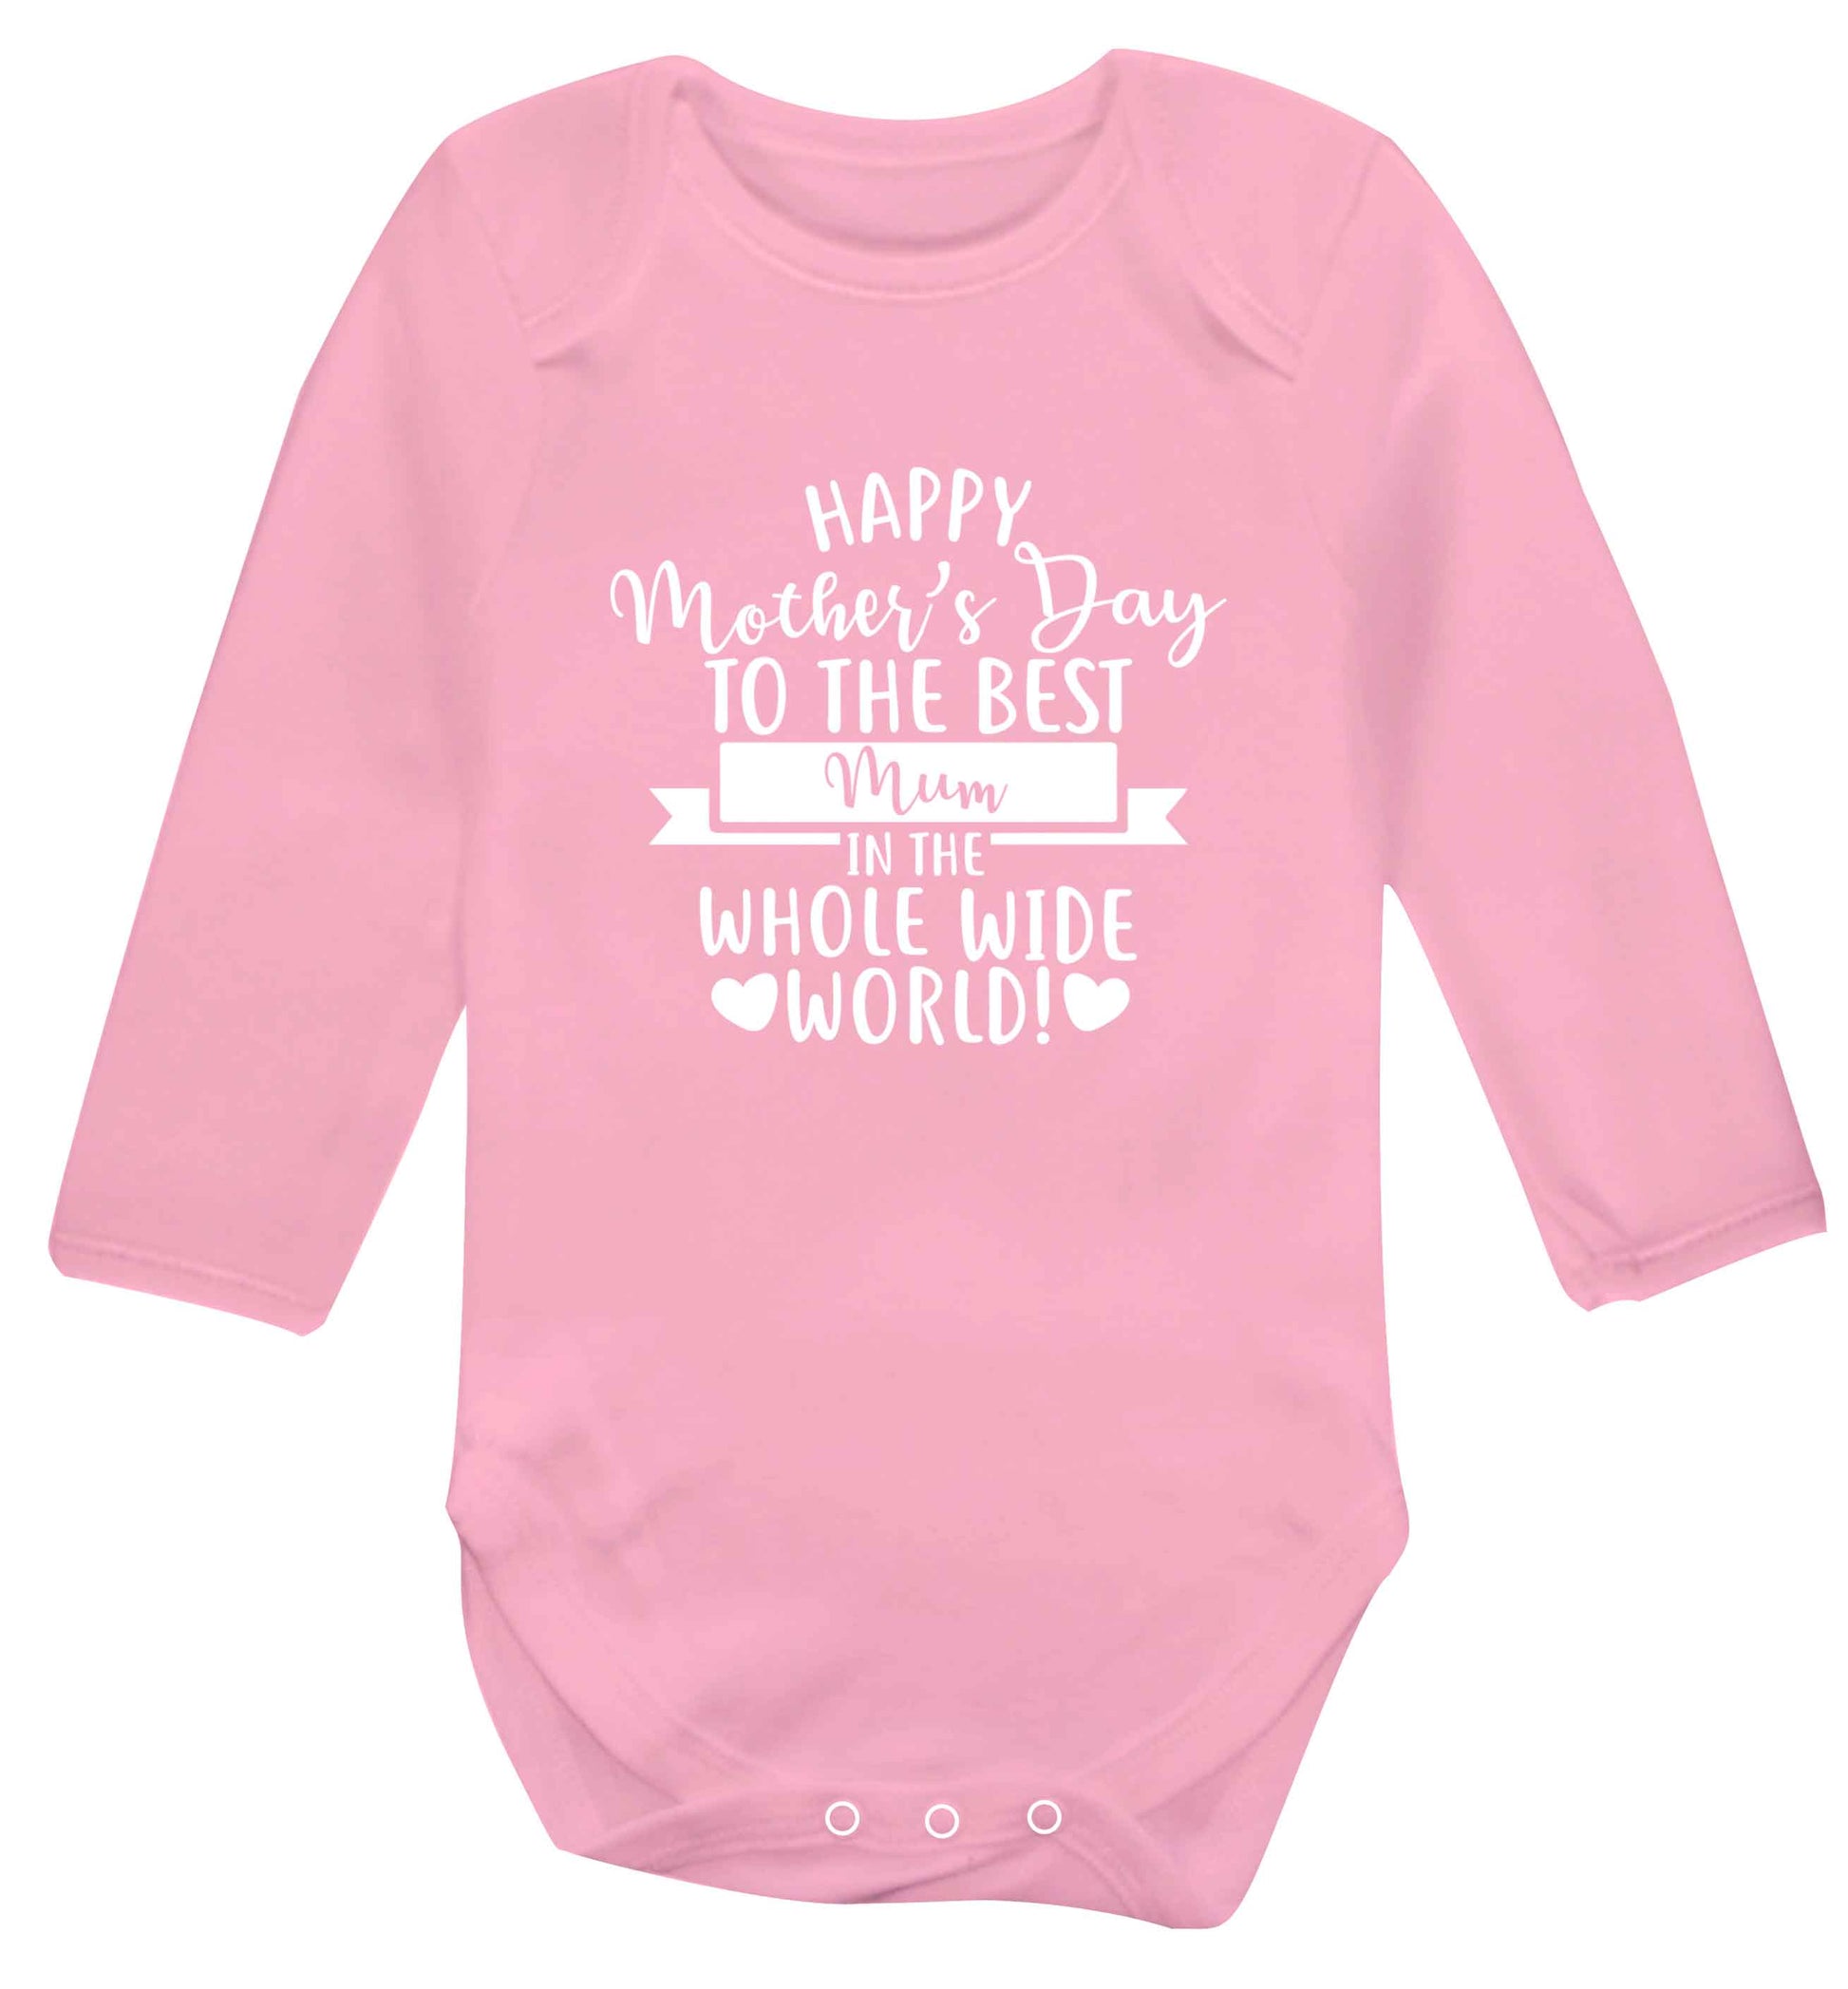 Happy mother's day to the best mum in the world baby vest long sleeved pale pink 6-12 months